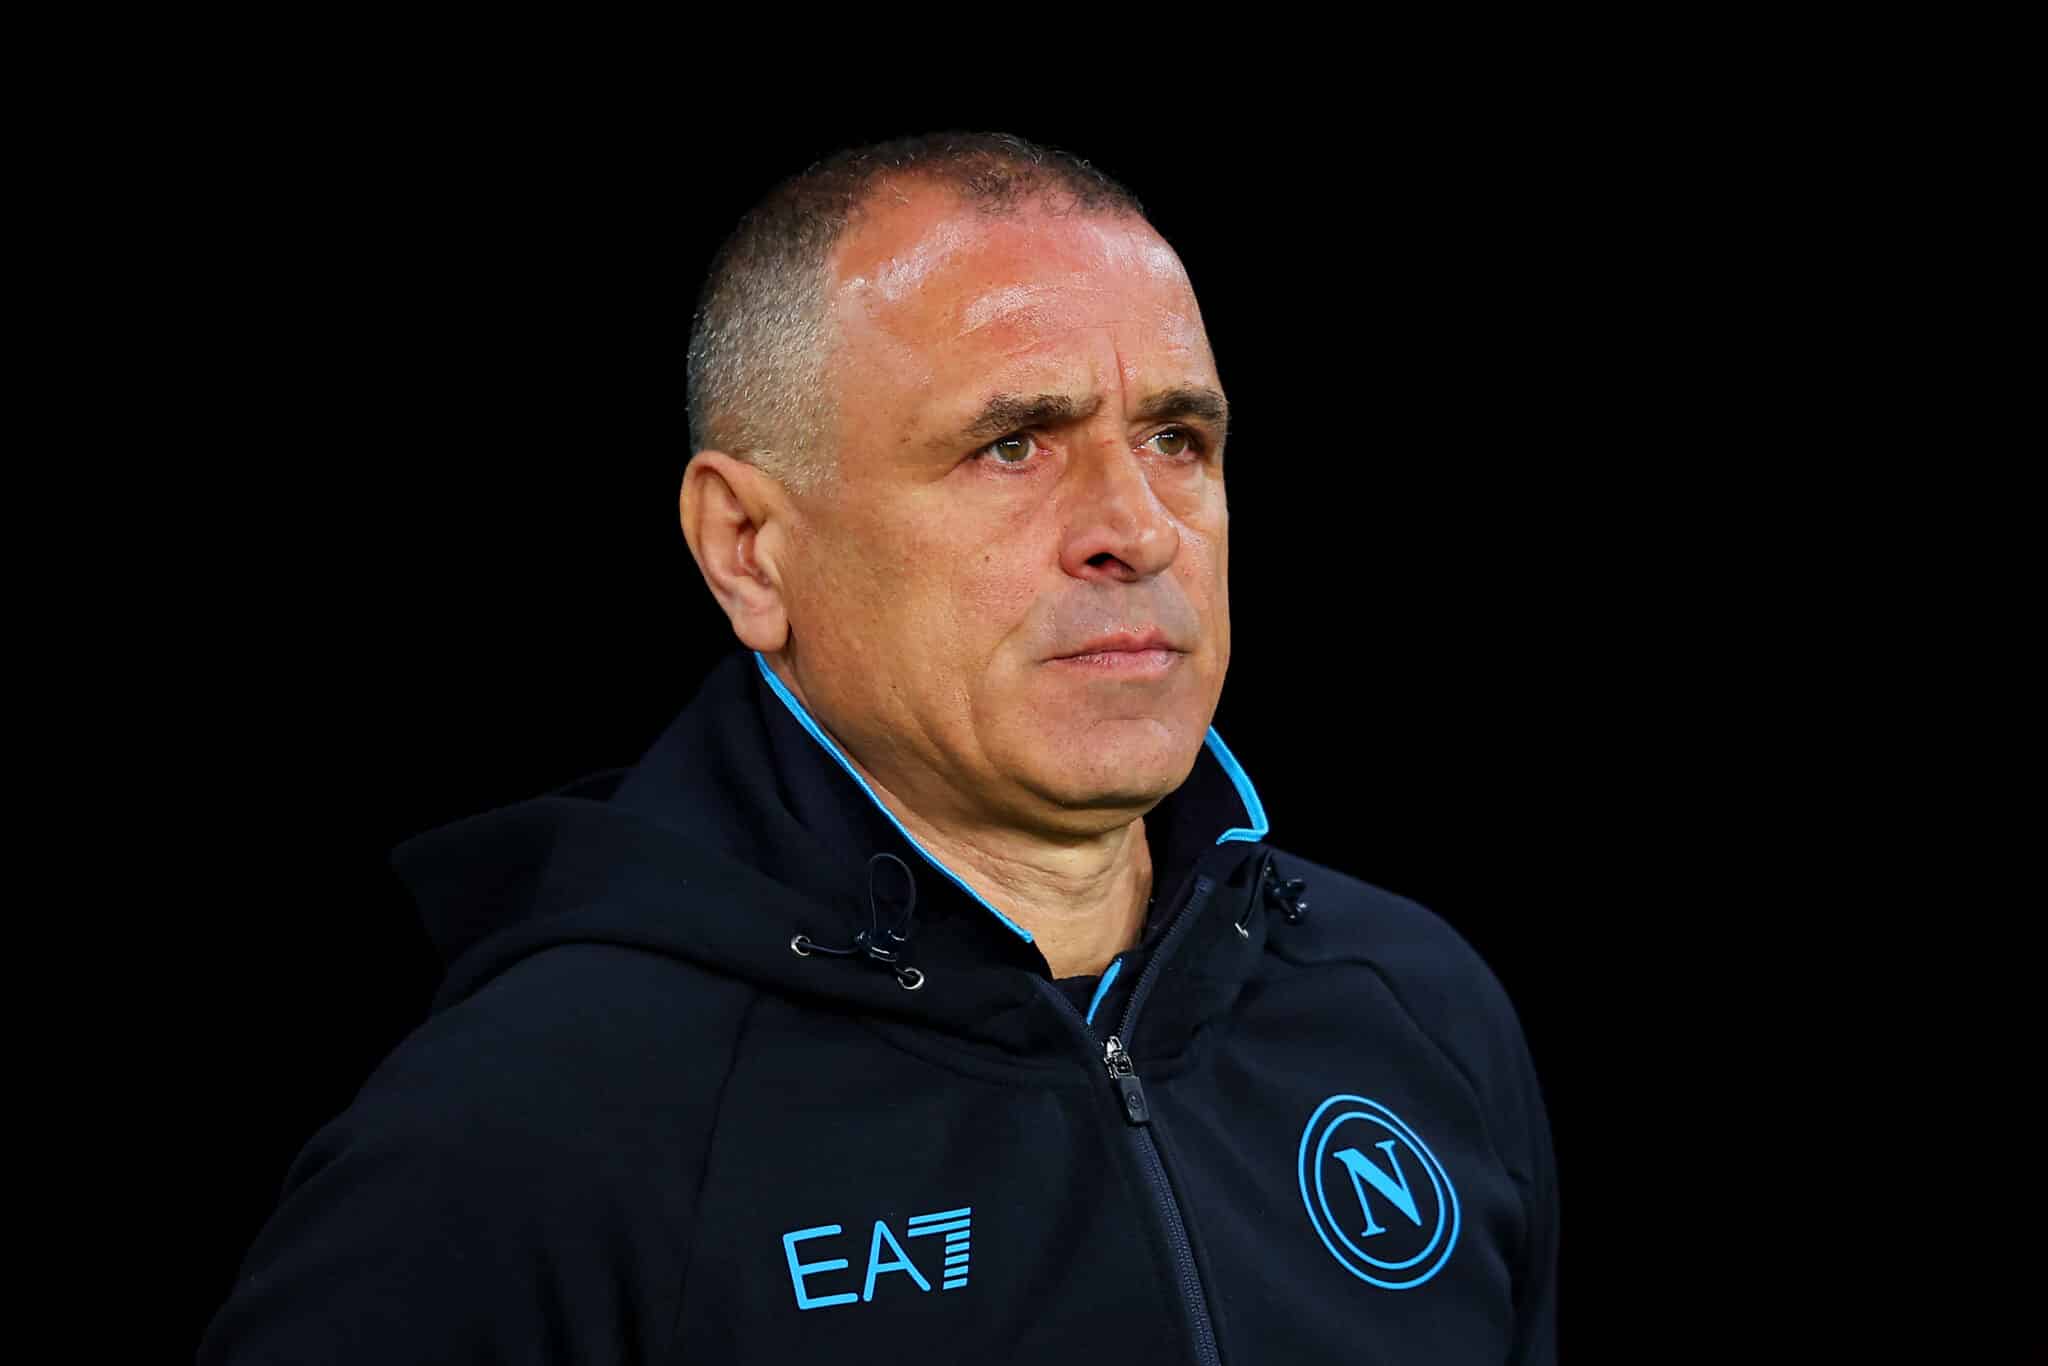 Francesco Calzona is about to pull double duty for the first time since being hired by Napoli. He’ll leave to manage Slovakia during the break.